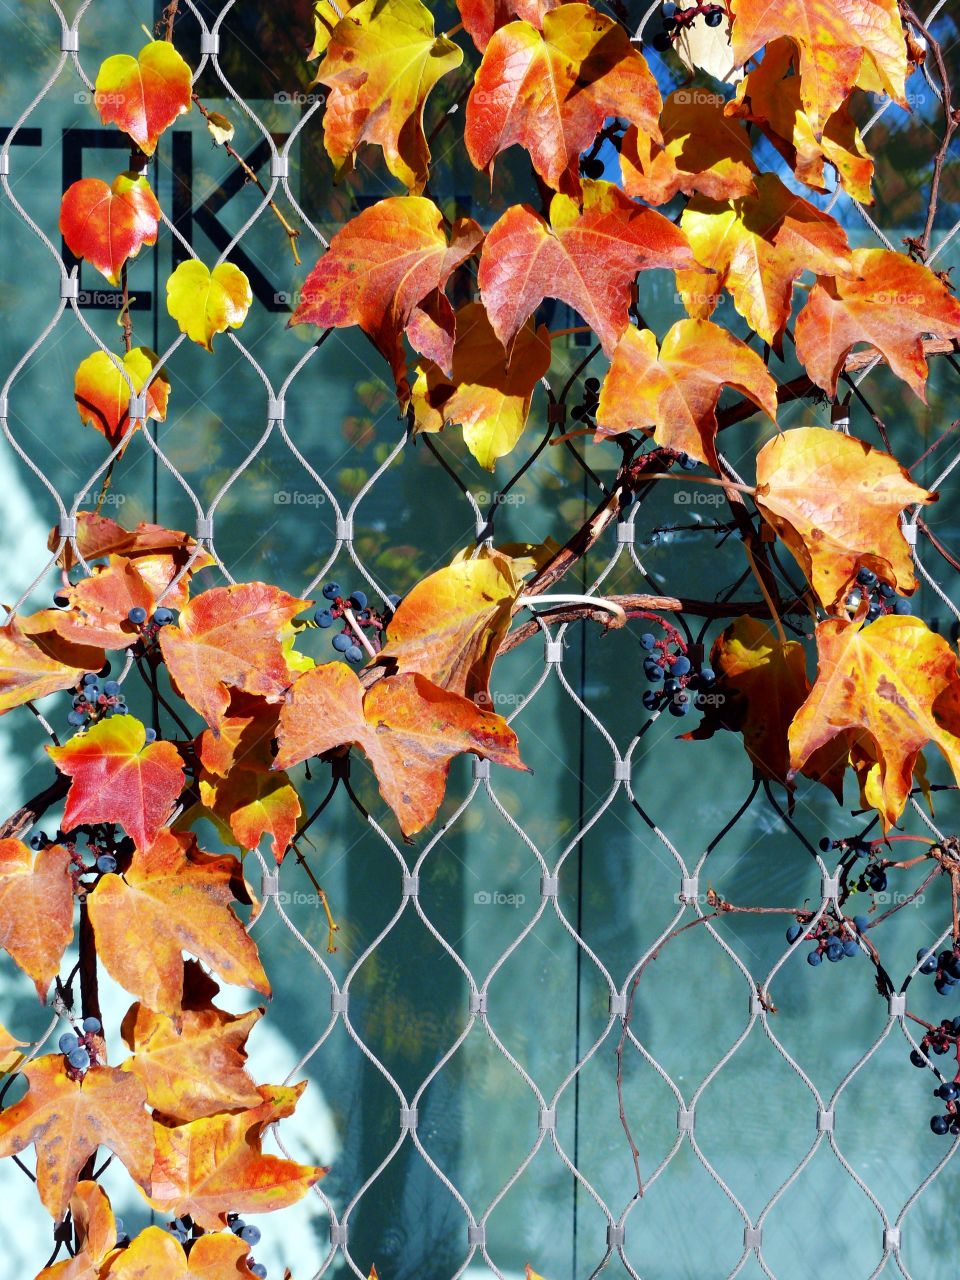 Autumn leaves wrapped around a wire fence.